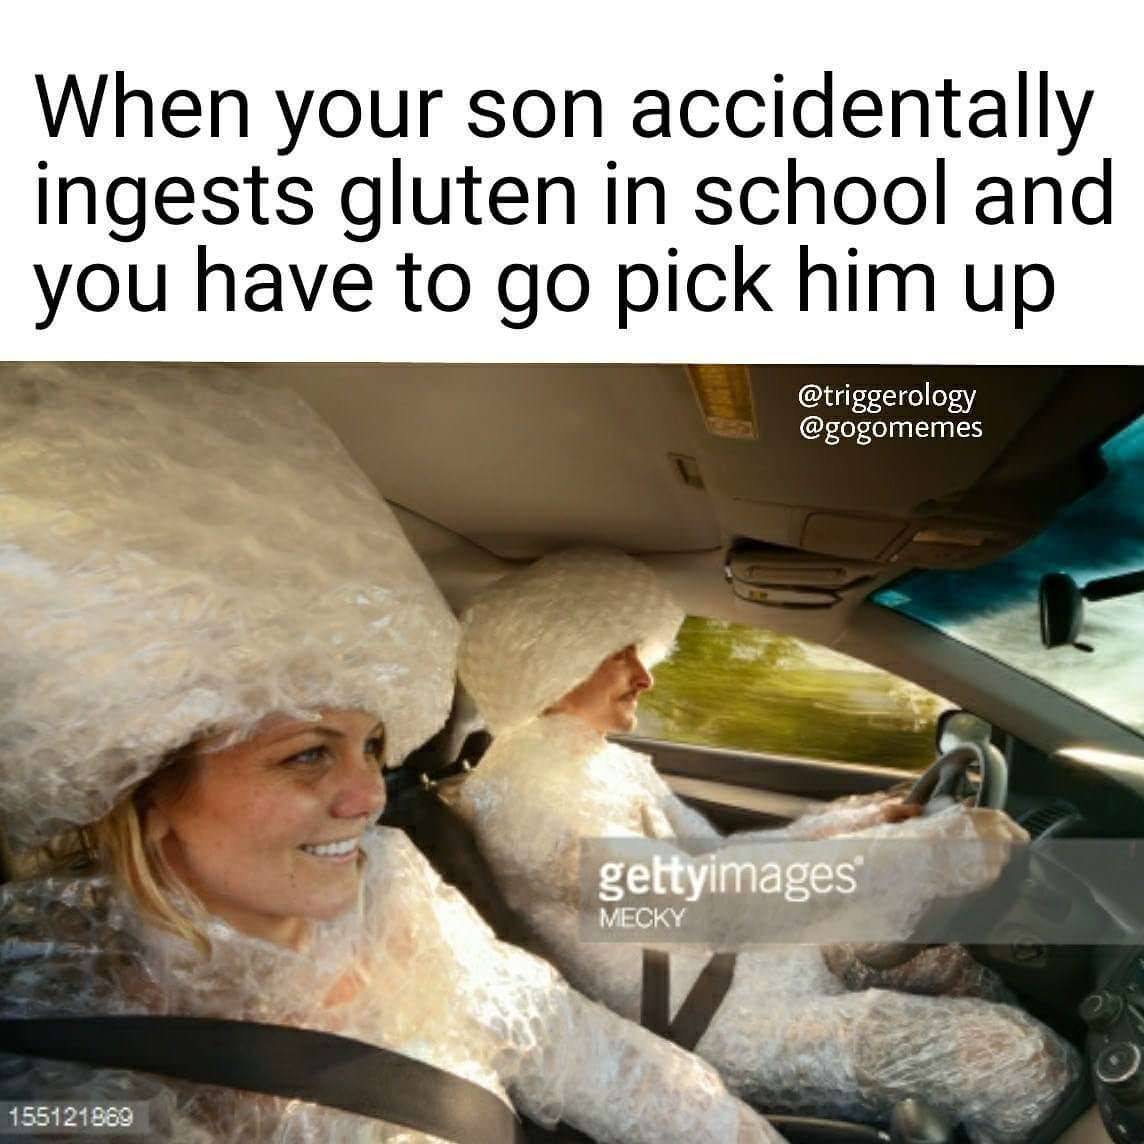 helicopter parent meme - When your son accidentally ingests gluten in school and you have to go pick him up gettyimages Mecky 155121869